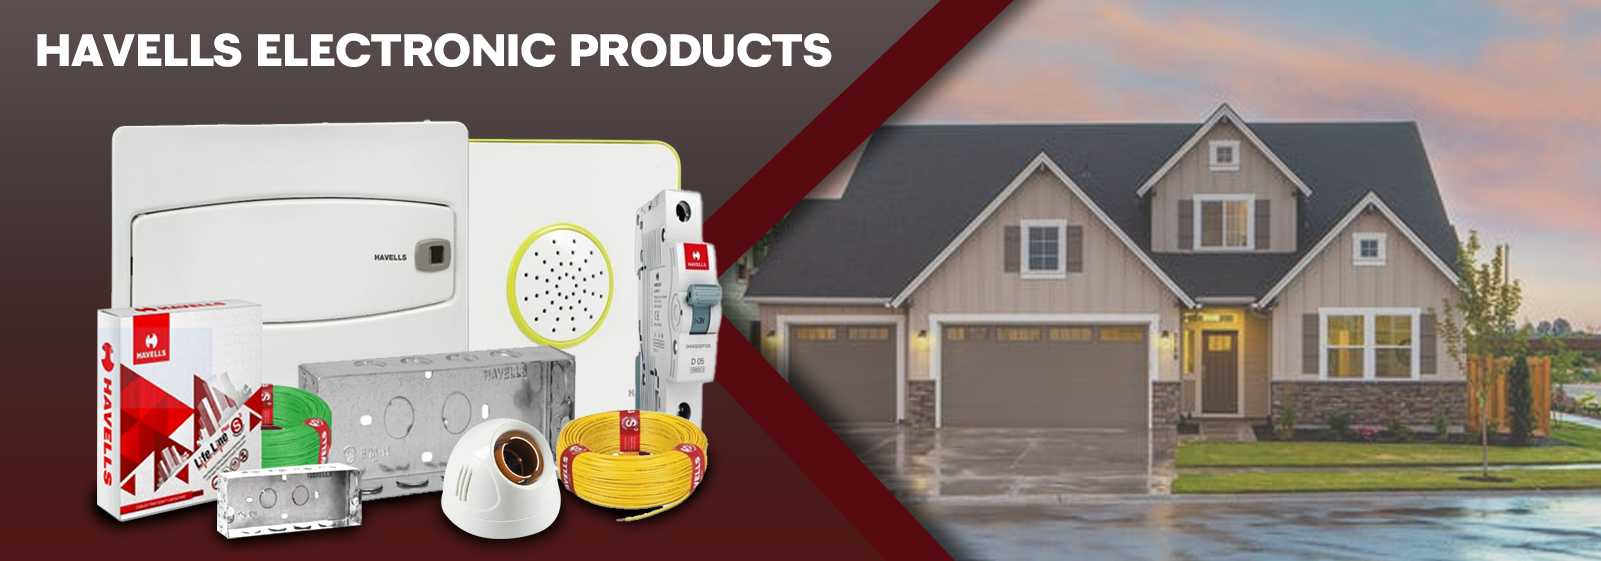 Havells Electronic Products Supplier